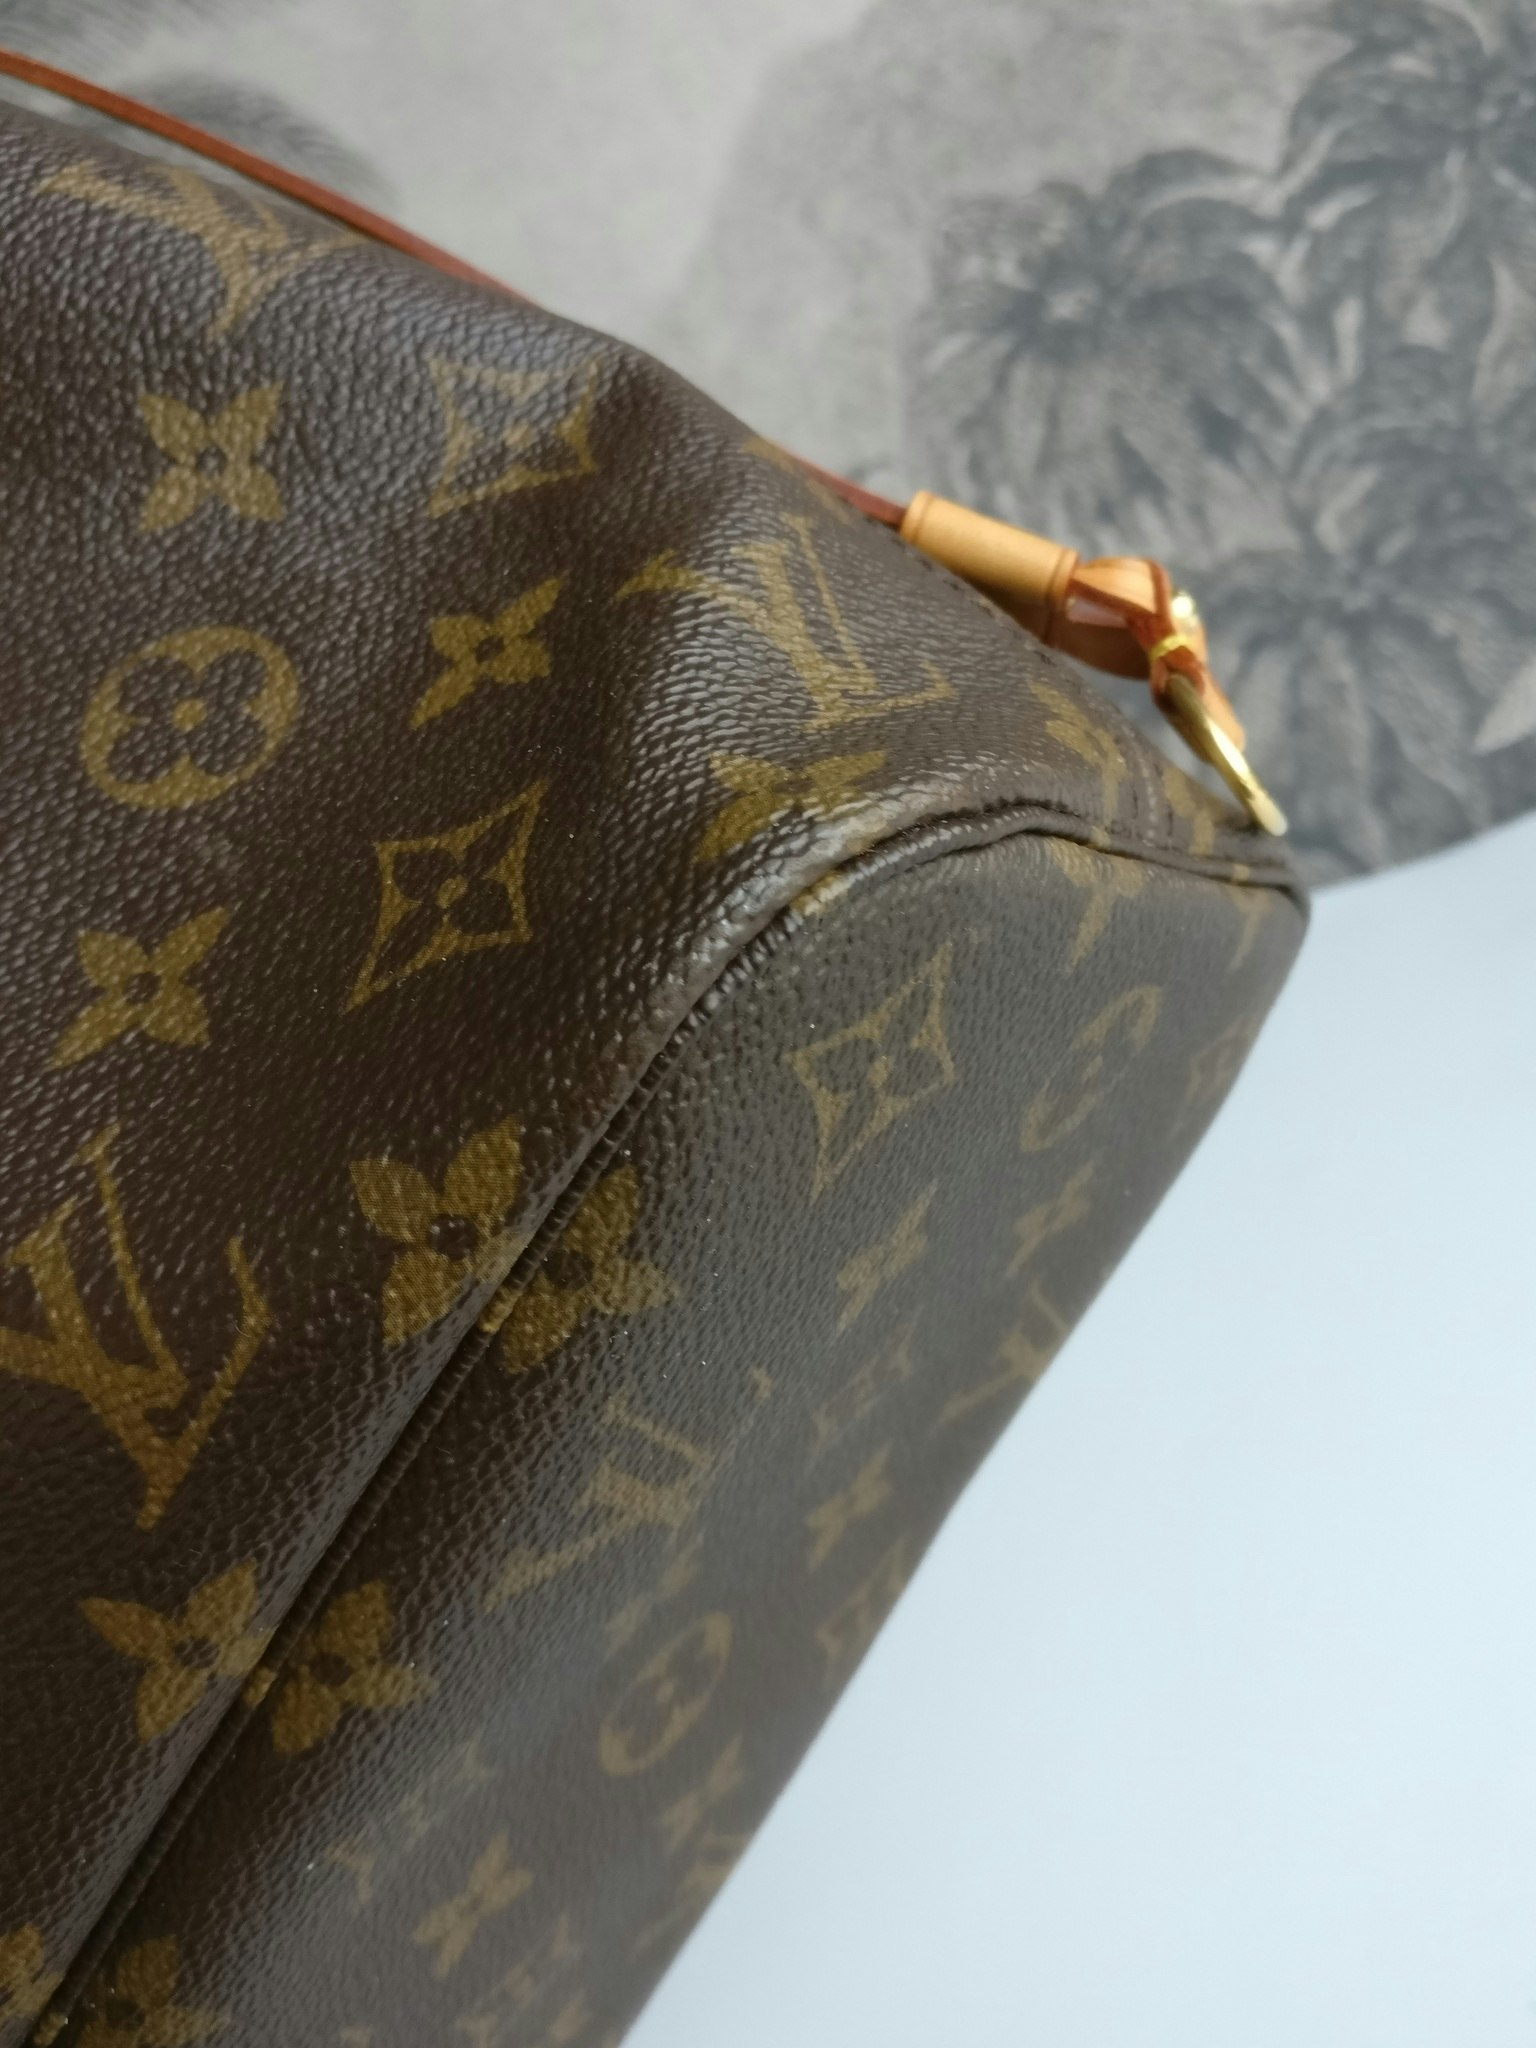 Louis Vuitton Limited Small Mon Monogram Neverfull PM Tote 97lv28W 